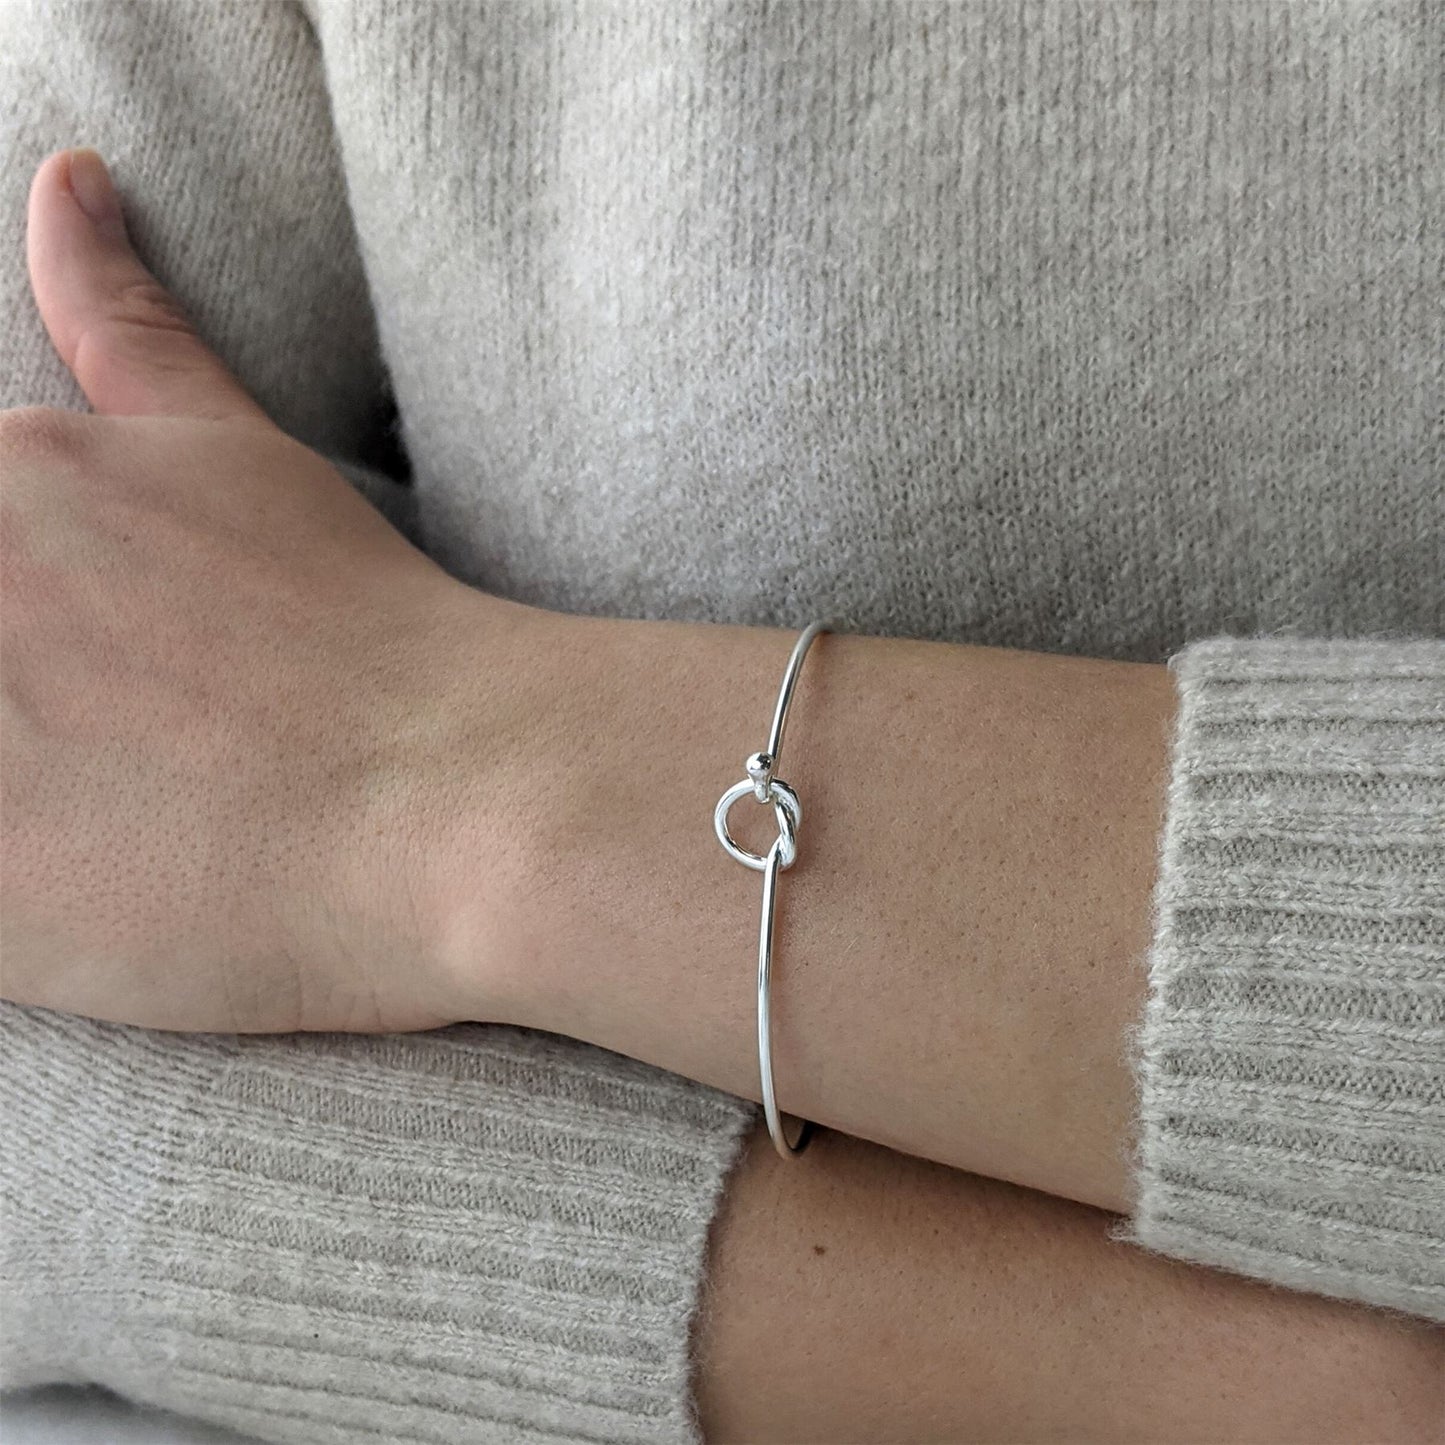 Sterling Silver Friendship Knot Bangle Thin Bracelet With Hook Clasp